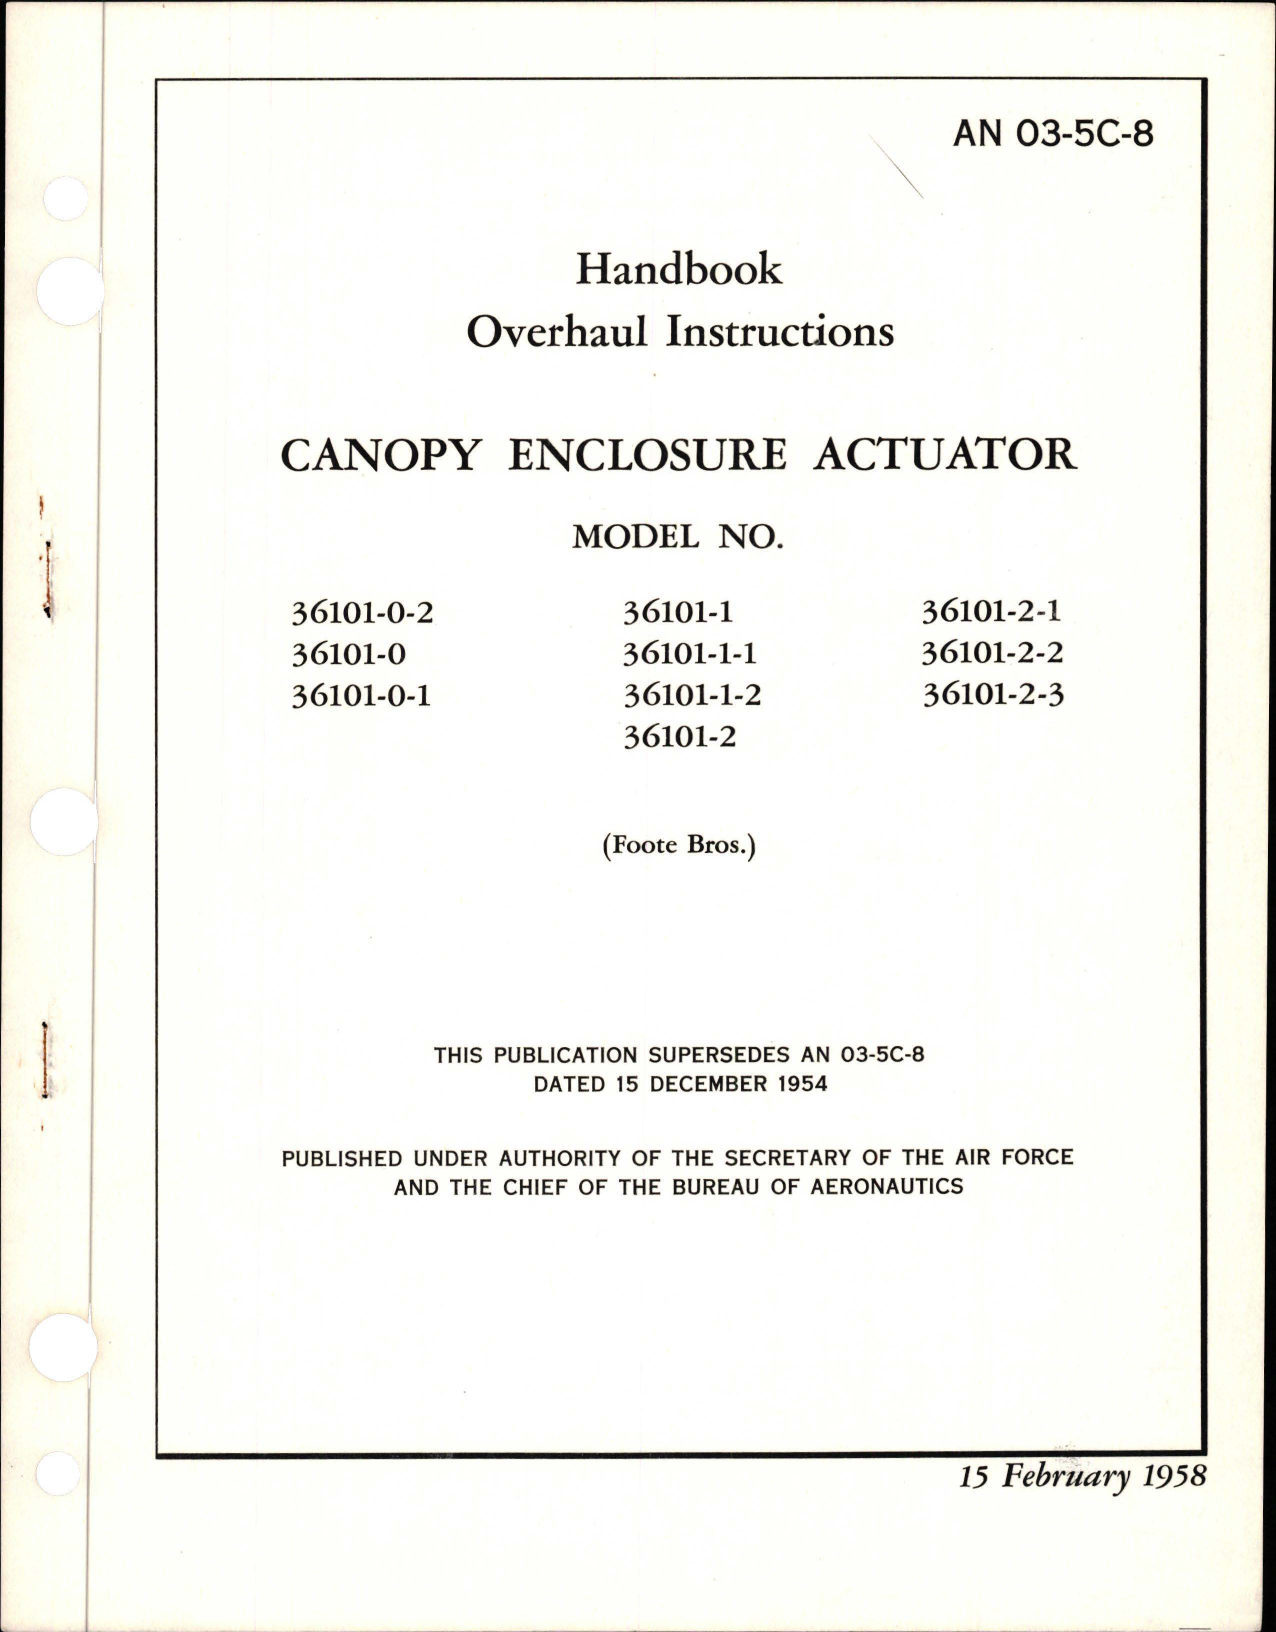 Sample page 1 from AirCorps Library document: Overhaul Instructions for Canopy Enclosure Actuator 